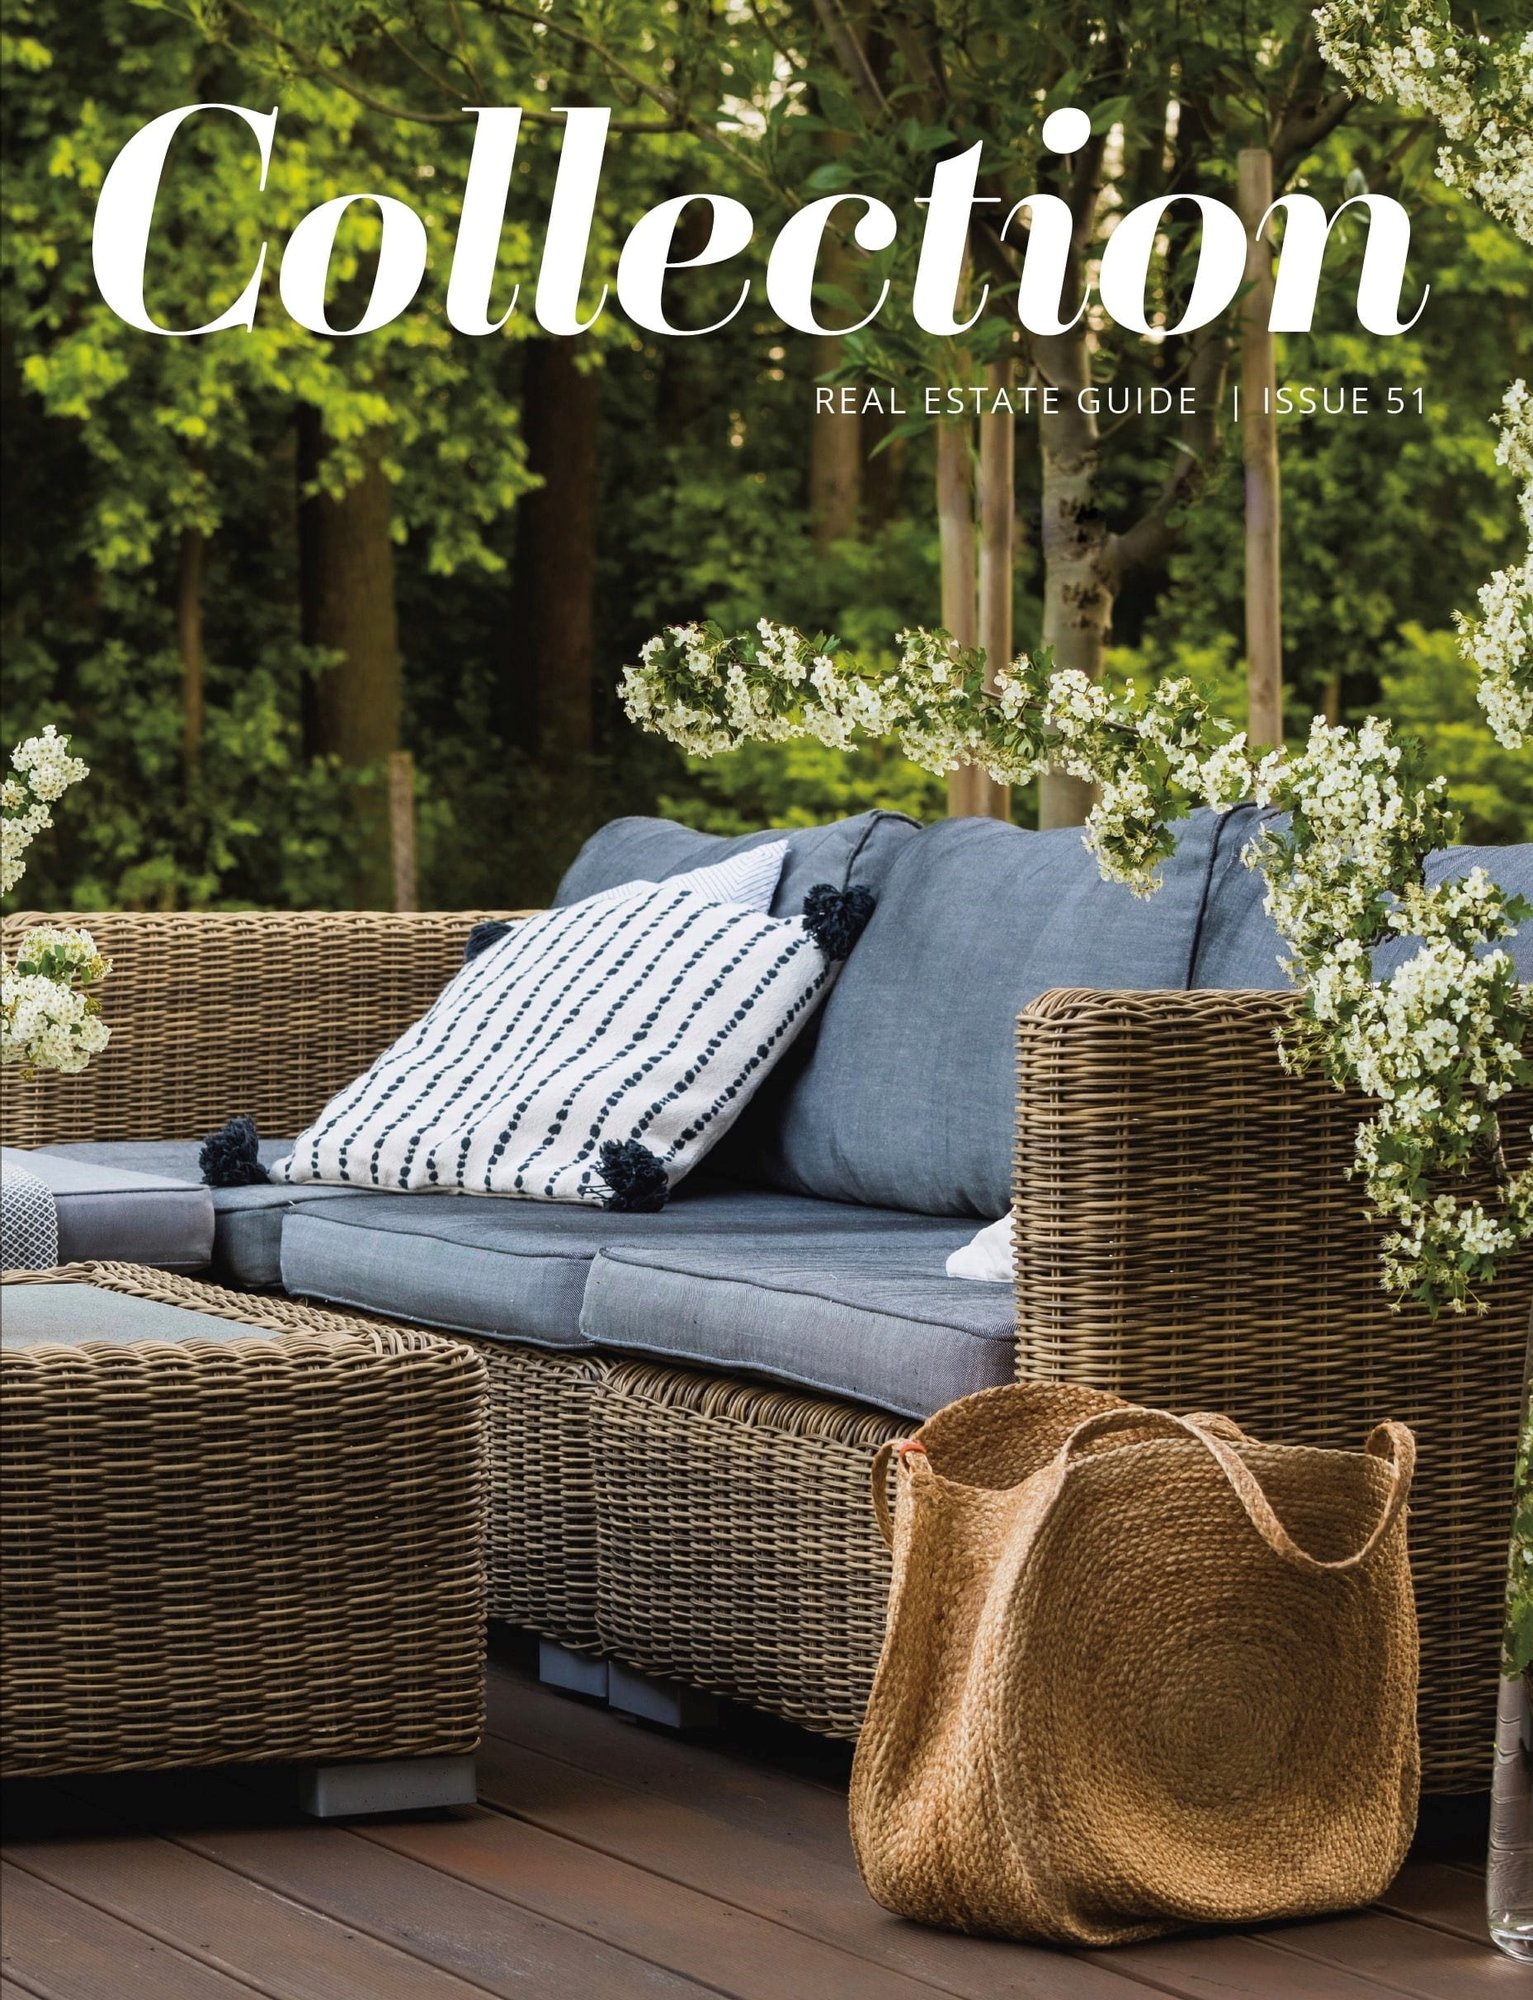 Cover of a magazine named Collection by Landmark Realty